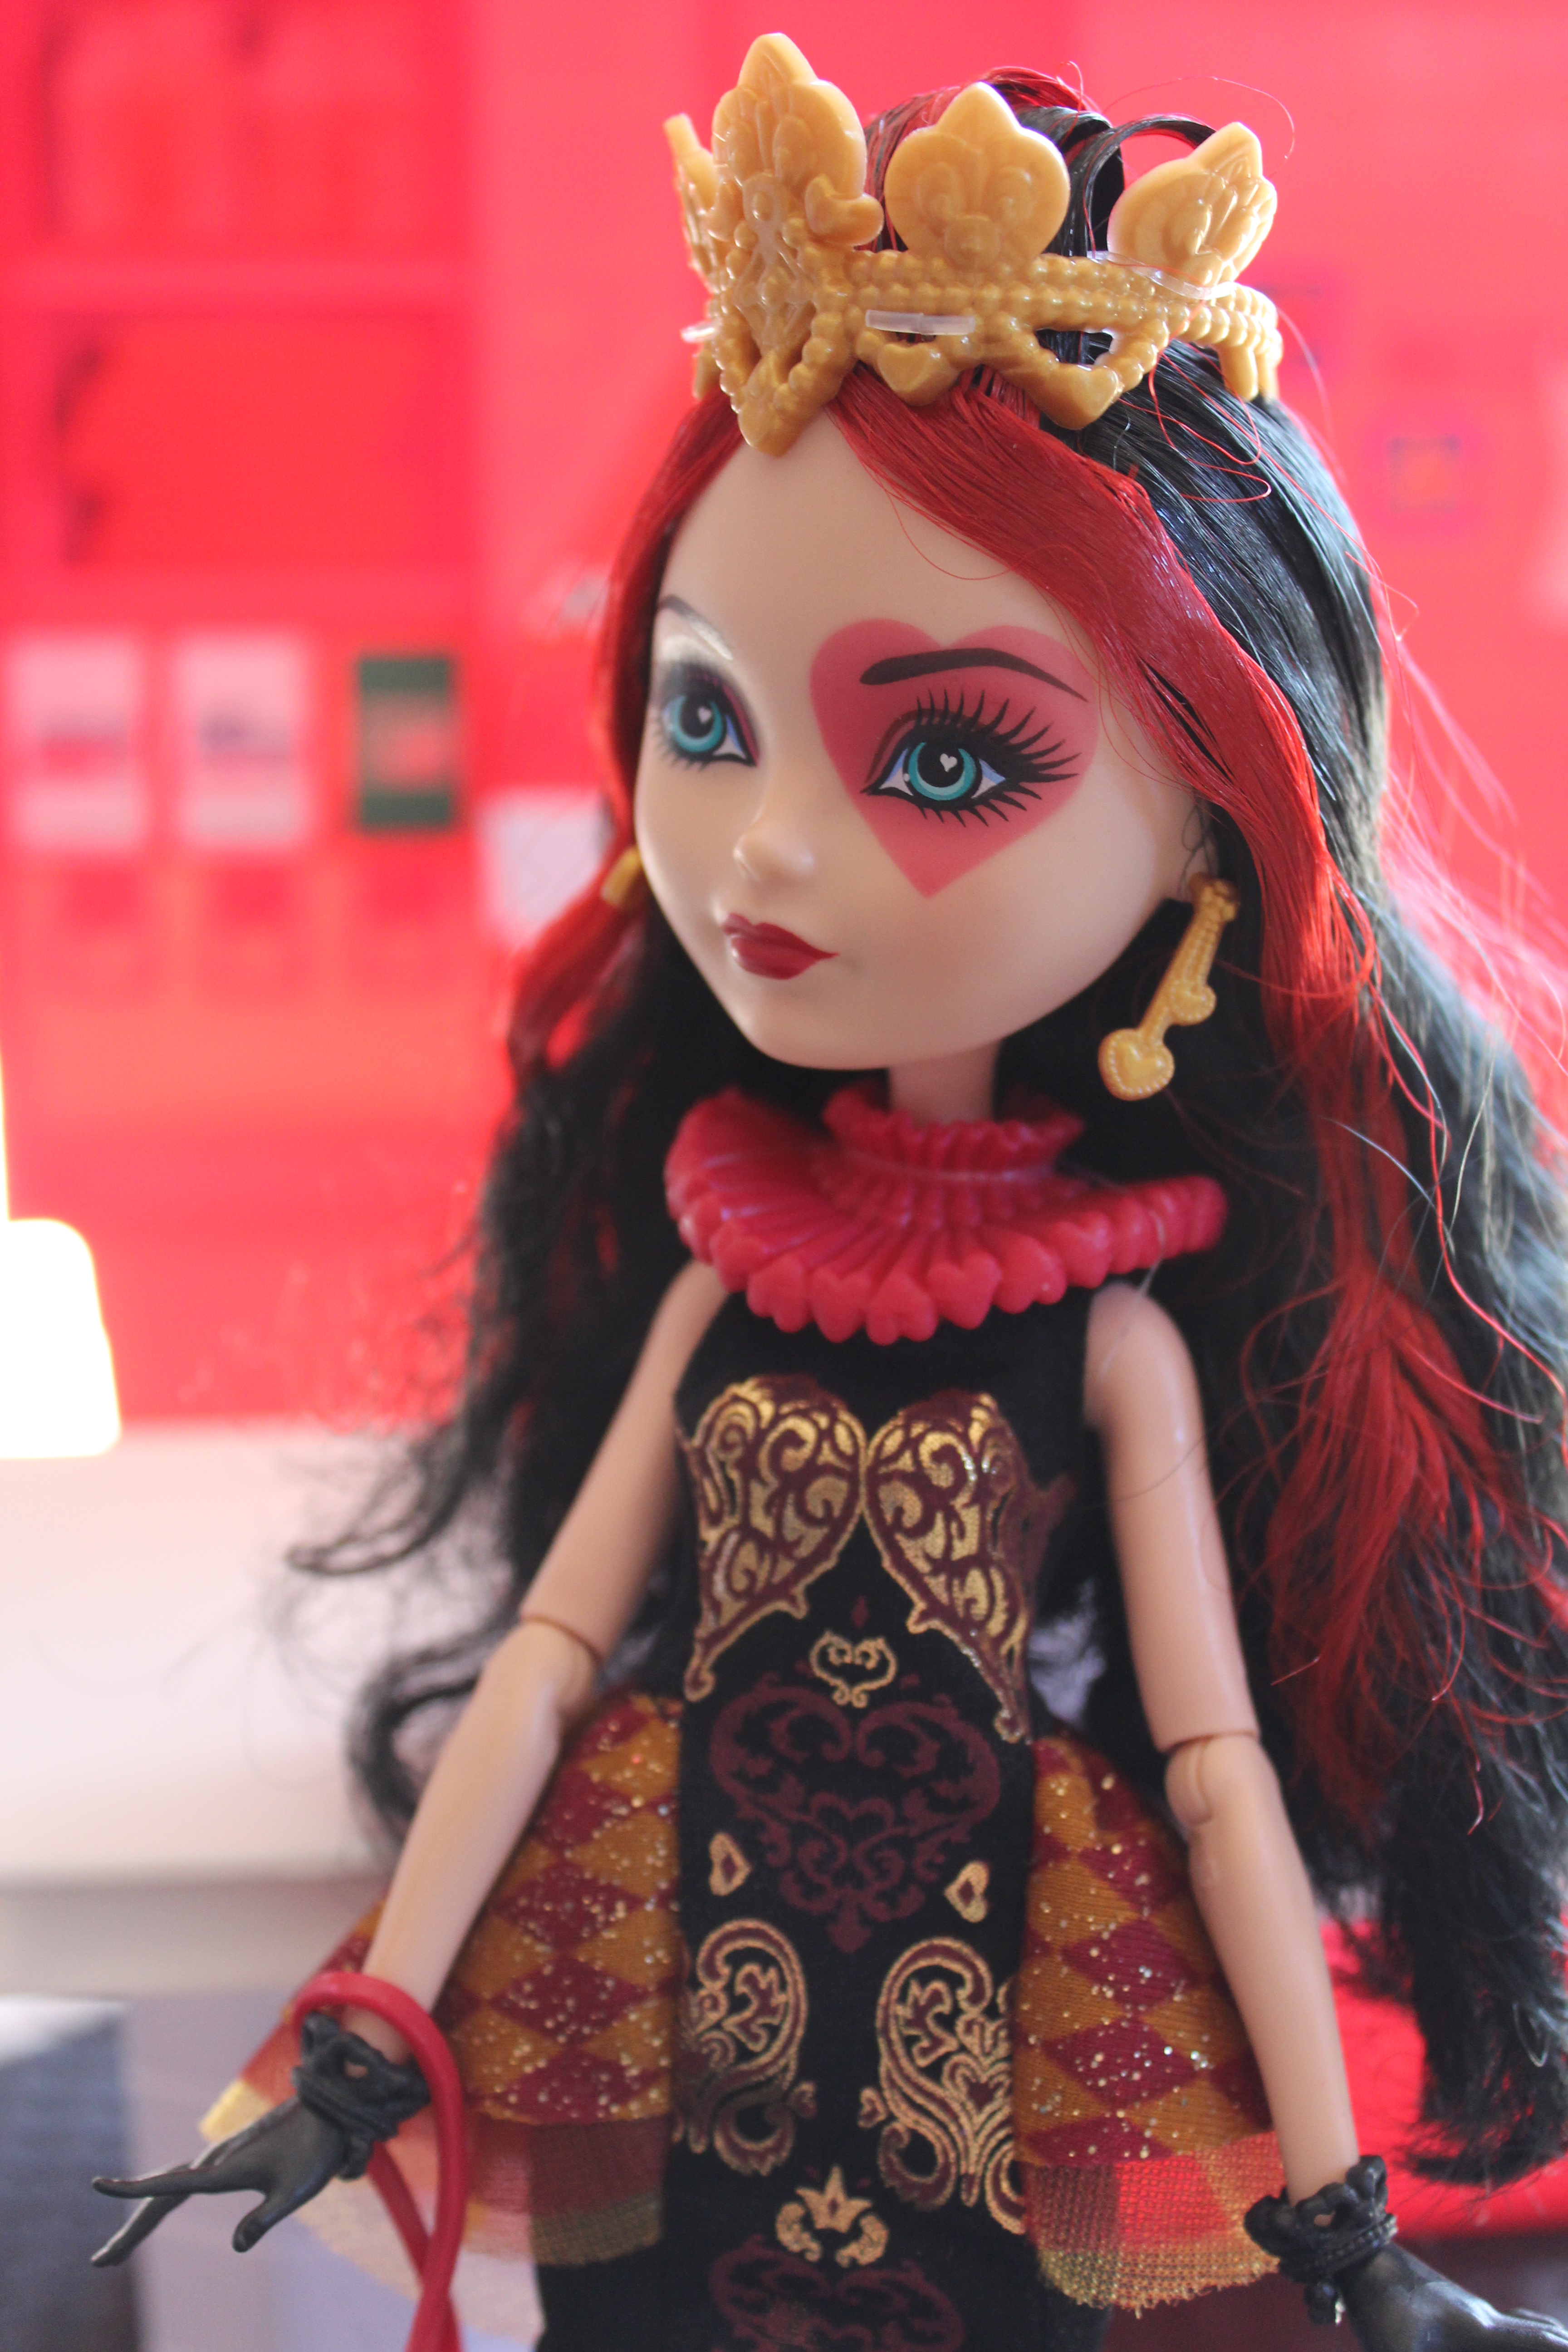 My toys,loves and fashions: Ever After High - Review Lizzie Hearts